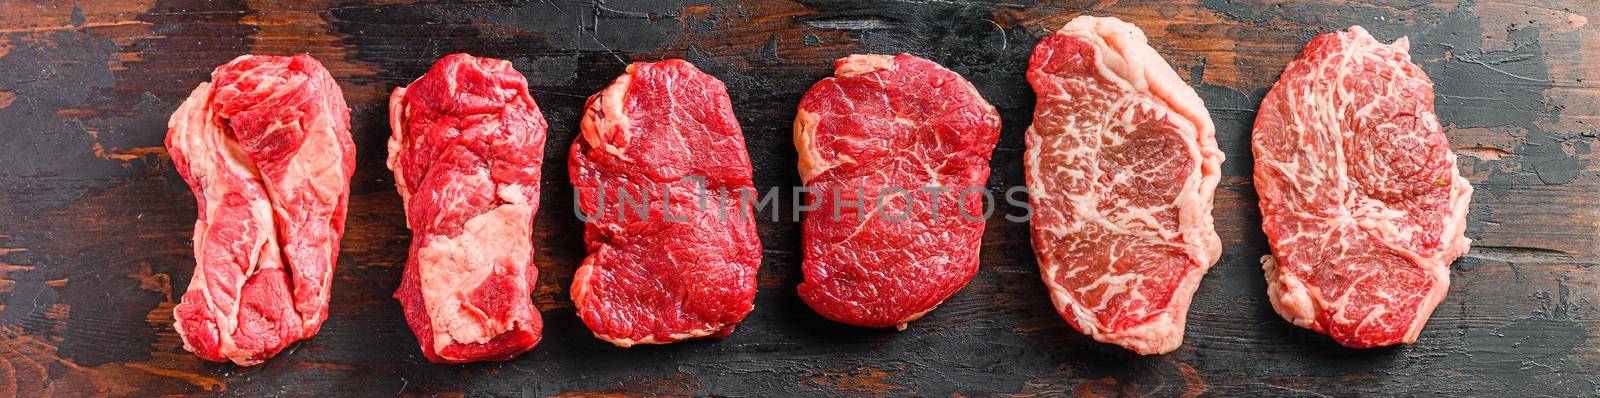 A set of different types of raw beef steaks:top blade, rump, chuck eye roll over old wooden background top view banner size. by Ilianesolenyi